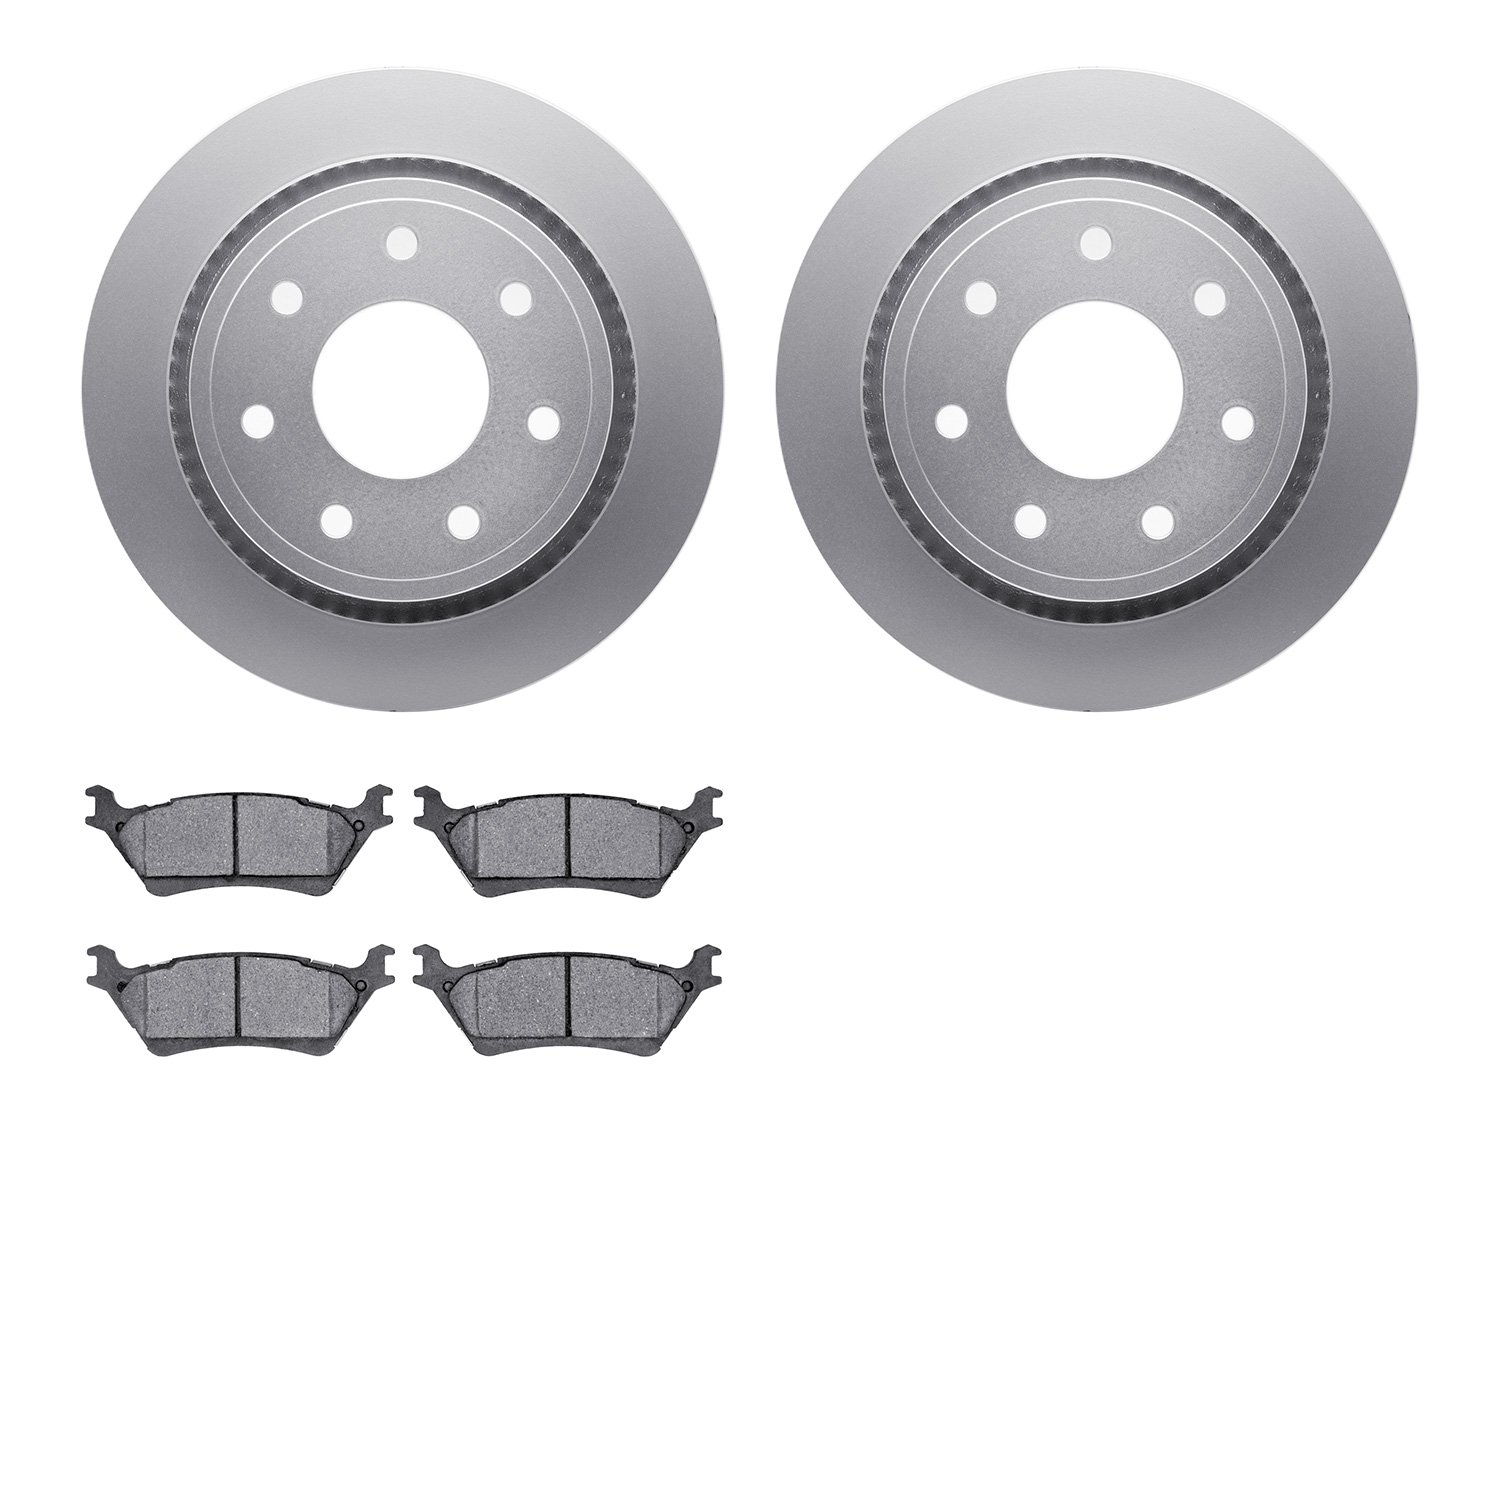 4402-54068 Geospec Brake Rotors with Ultimate-Duty Brake Pads Kit, 2012-2014 Ford/Lincoln/Mercury/Mazda, Position: Rear